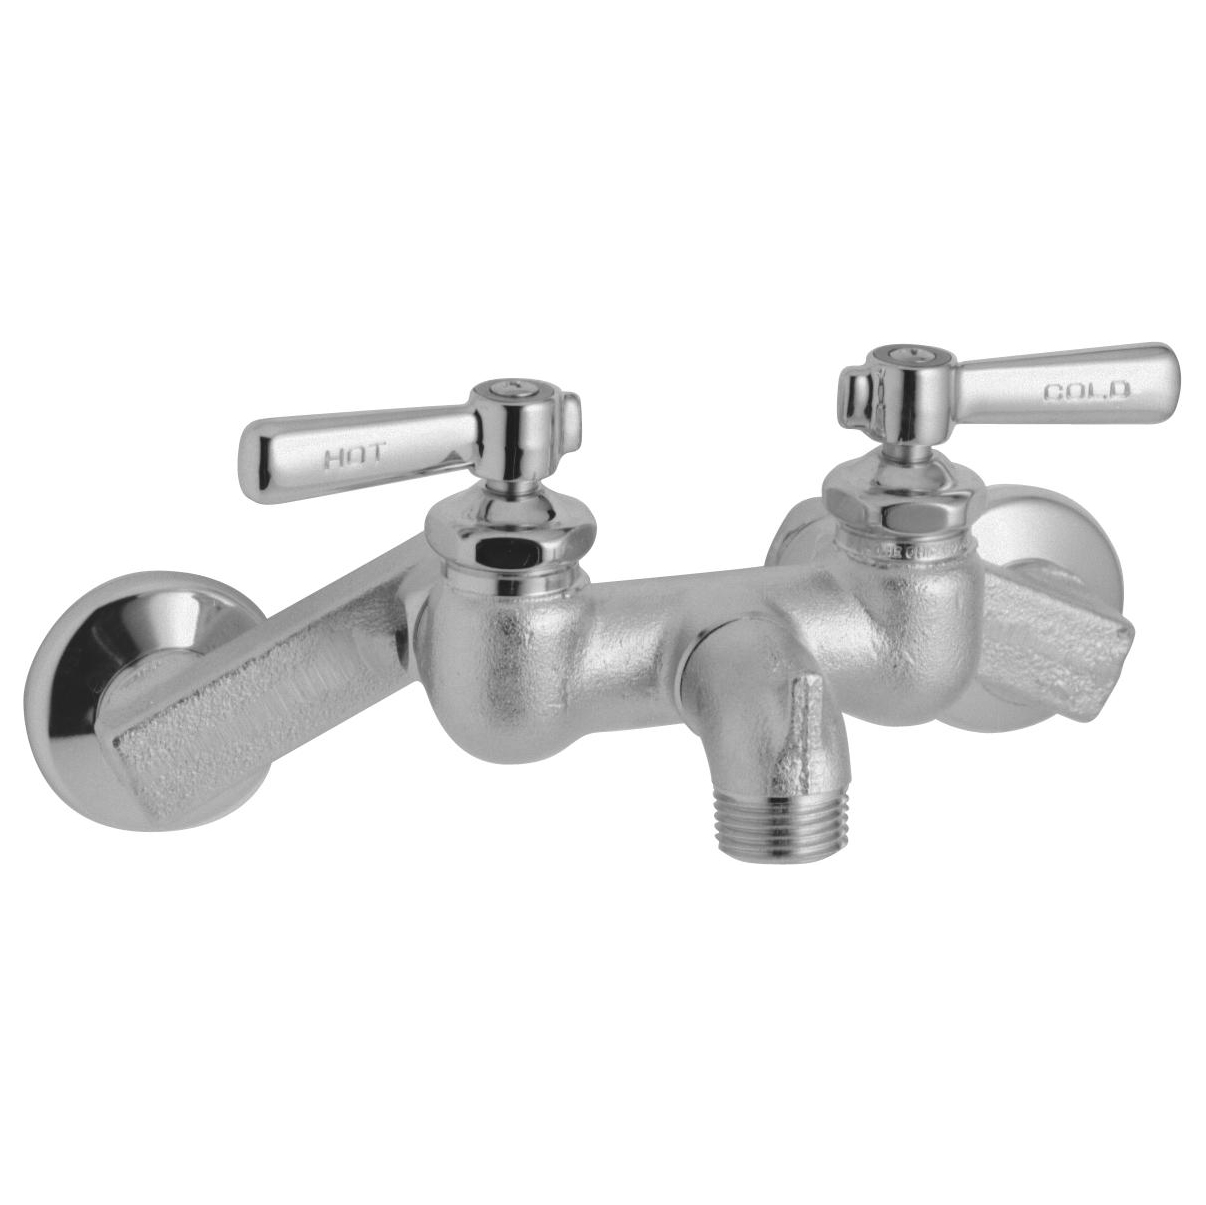 Wall Mount Service Sink Faucet In Chrome